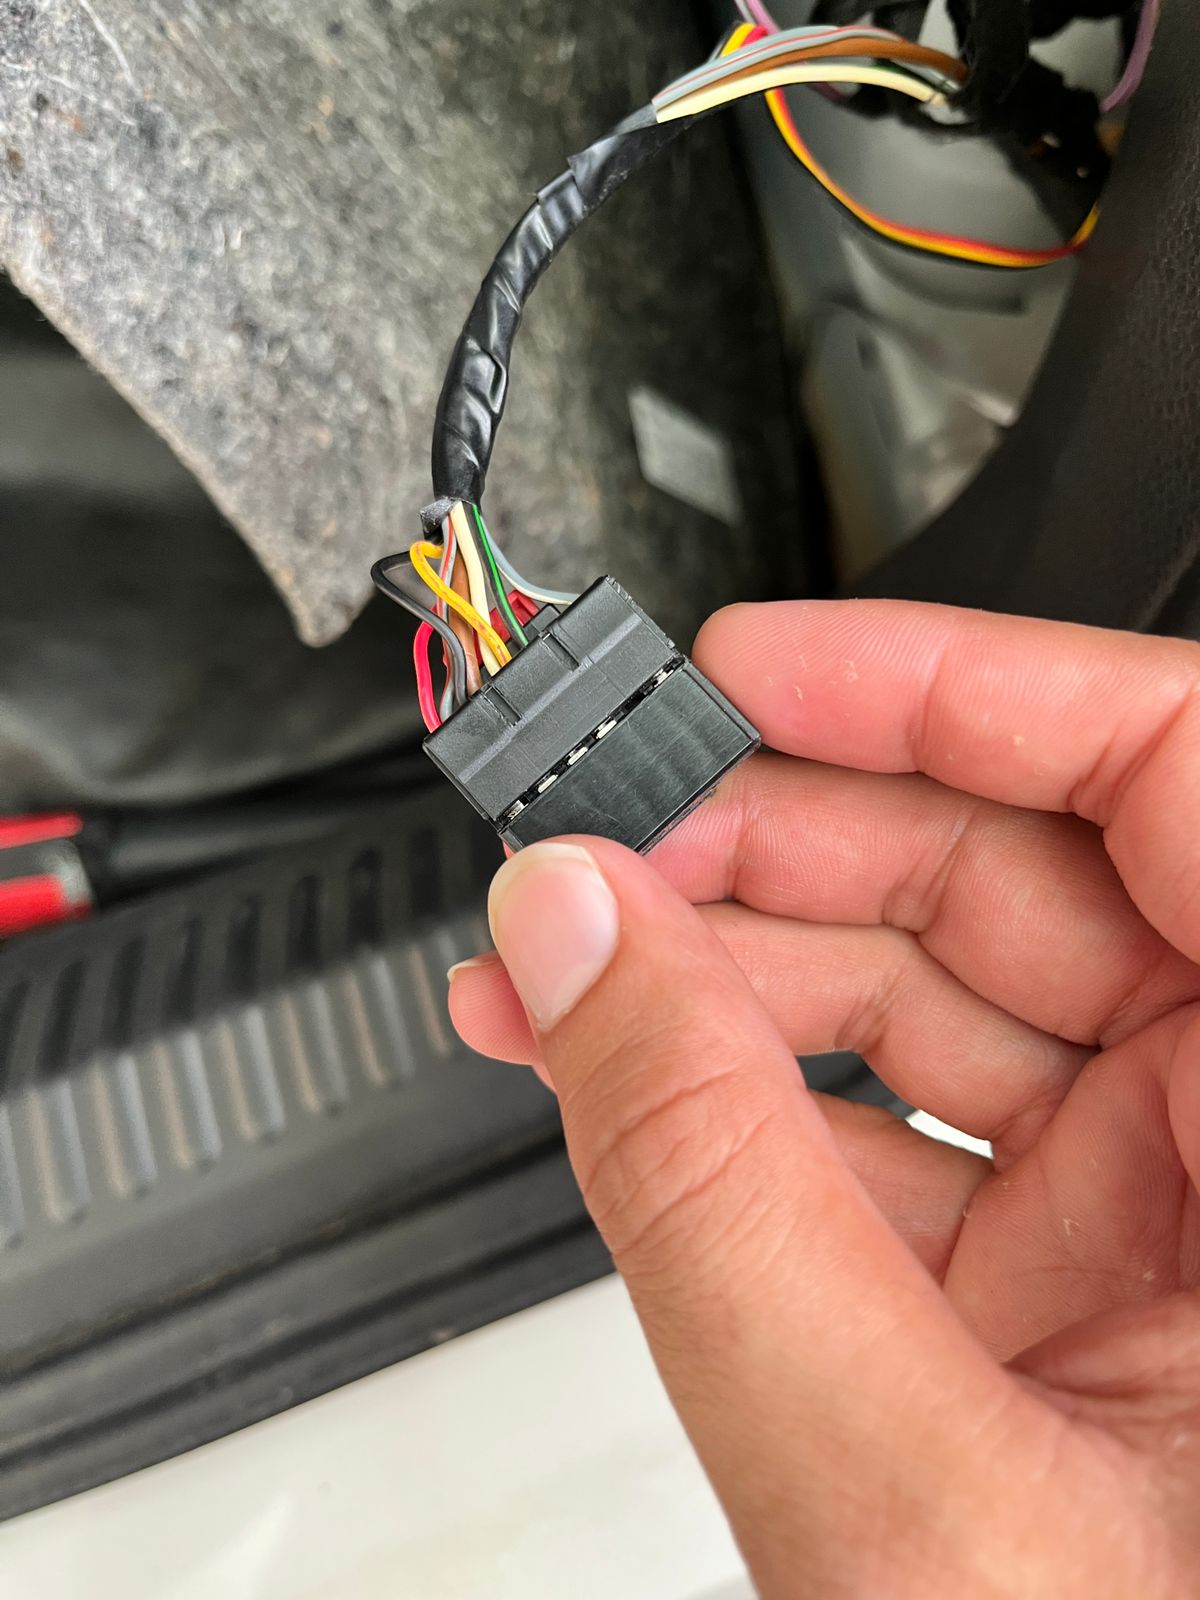 1. RED wire: for constant power at parking light input<br />2. BLACK wire: Ground <br />3. YELLOW wire: Takes input from brake light to make the lights blink.